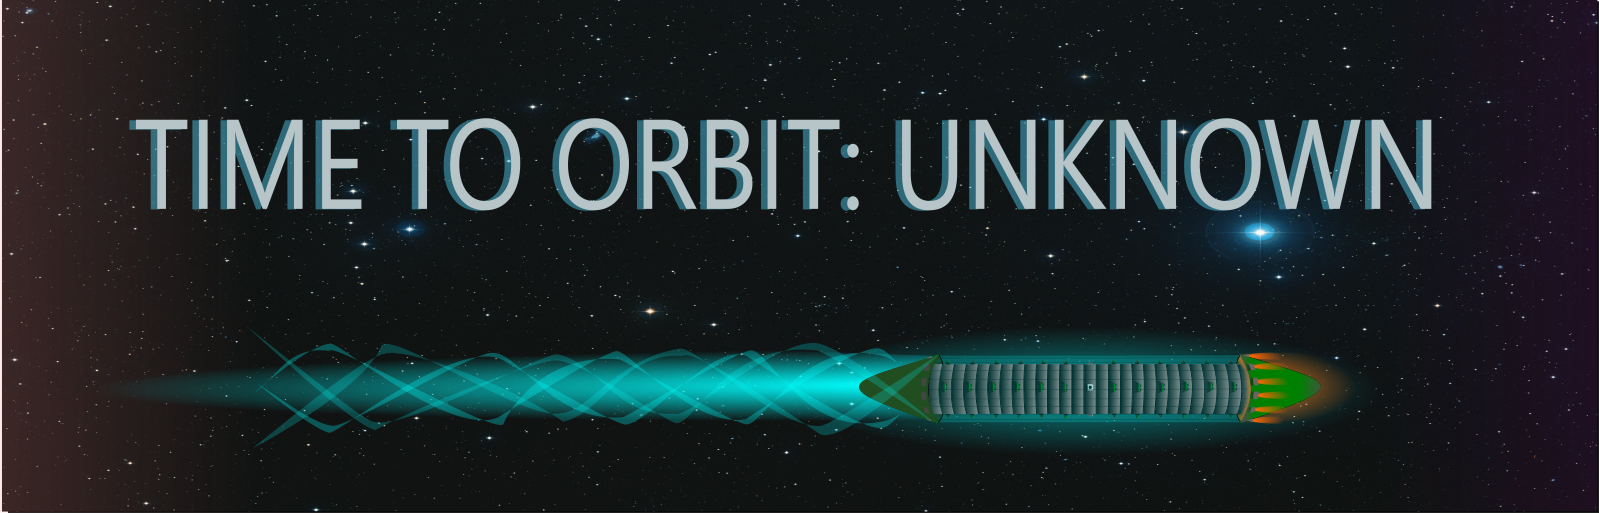 Time To Orbit: Unknown (EBook)